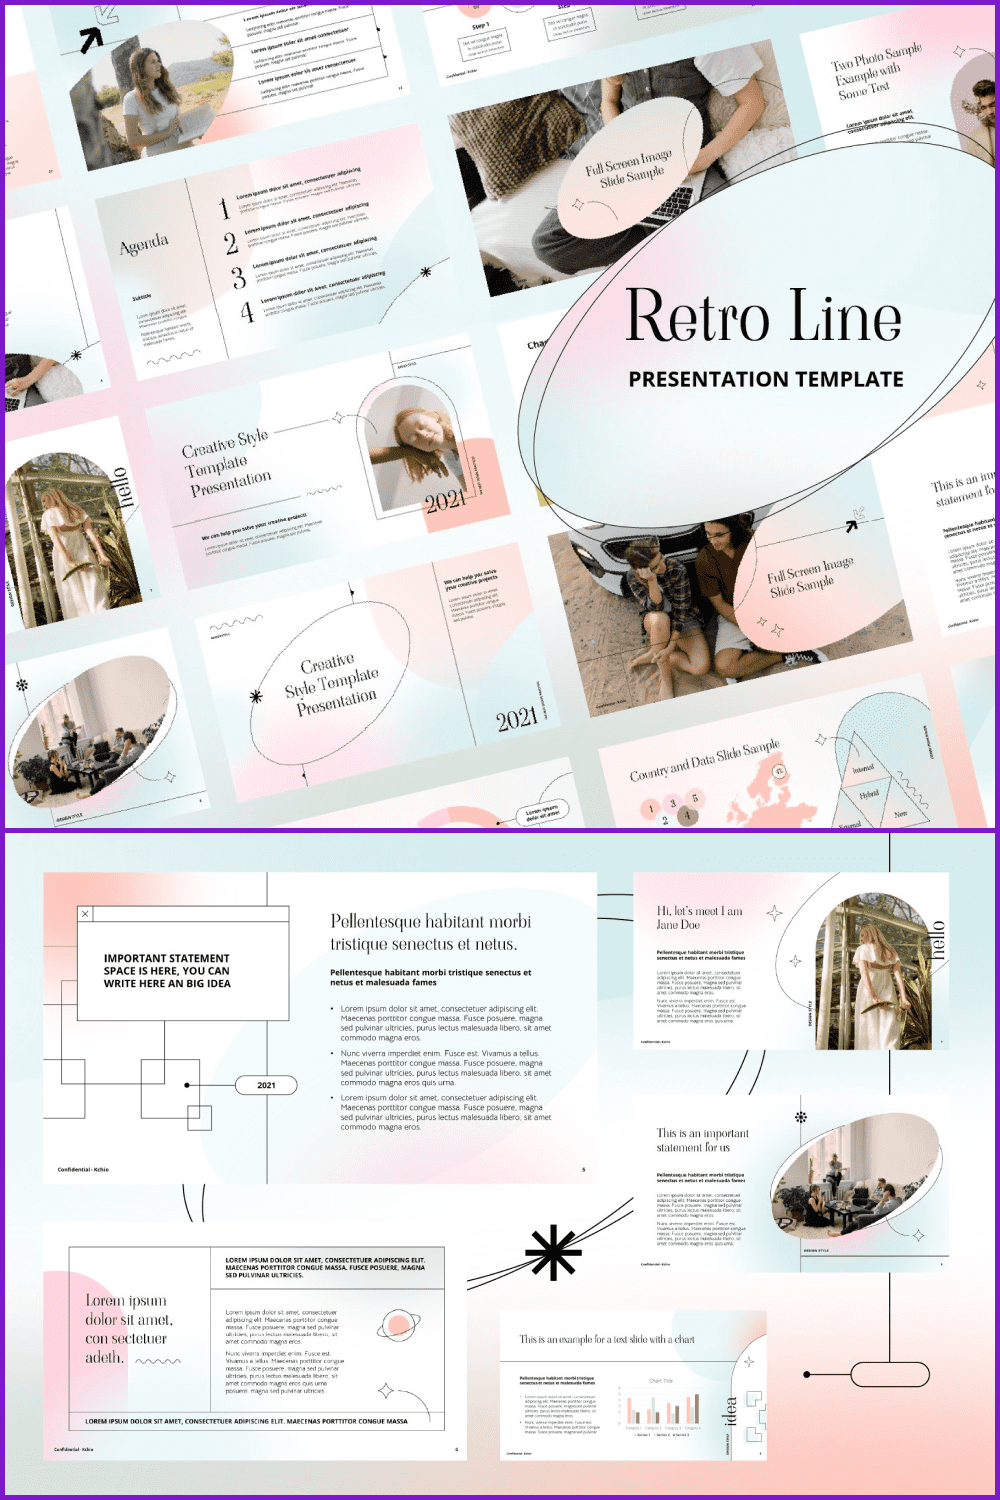 Retro styled template with pastel colors.